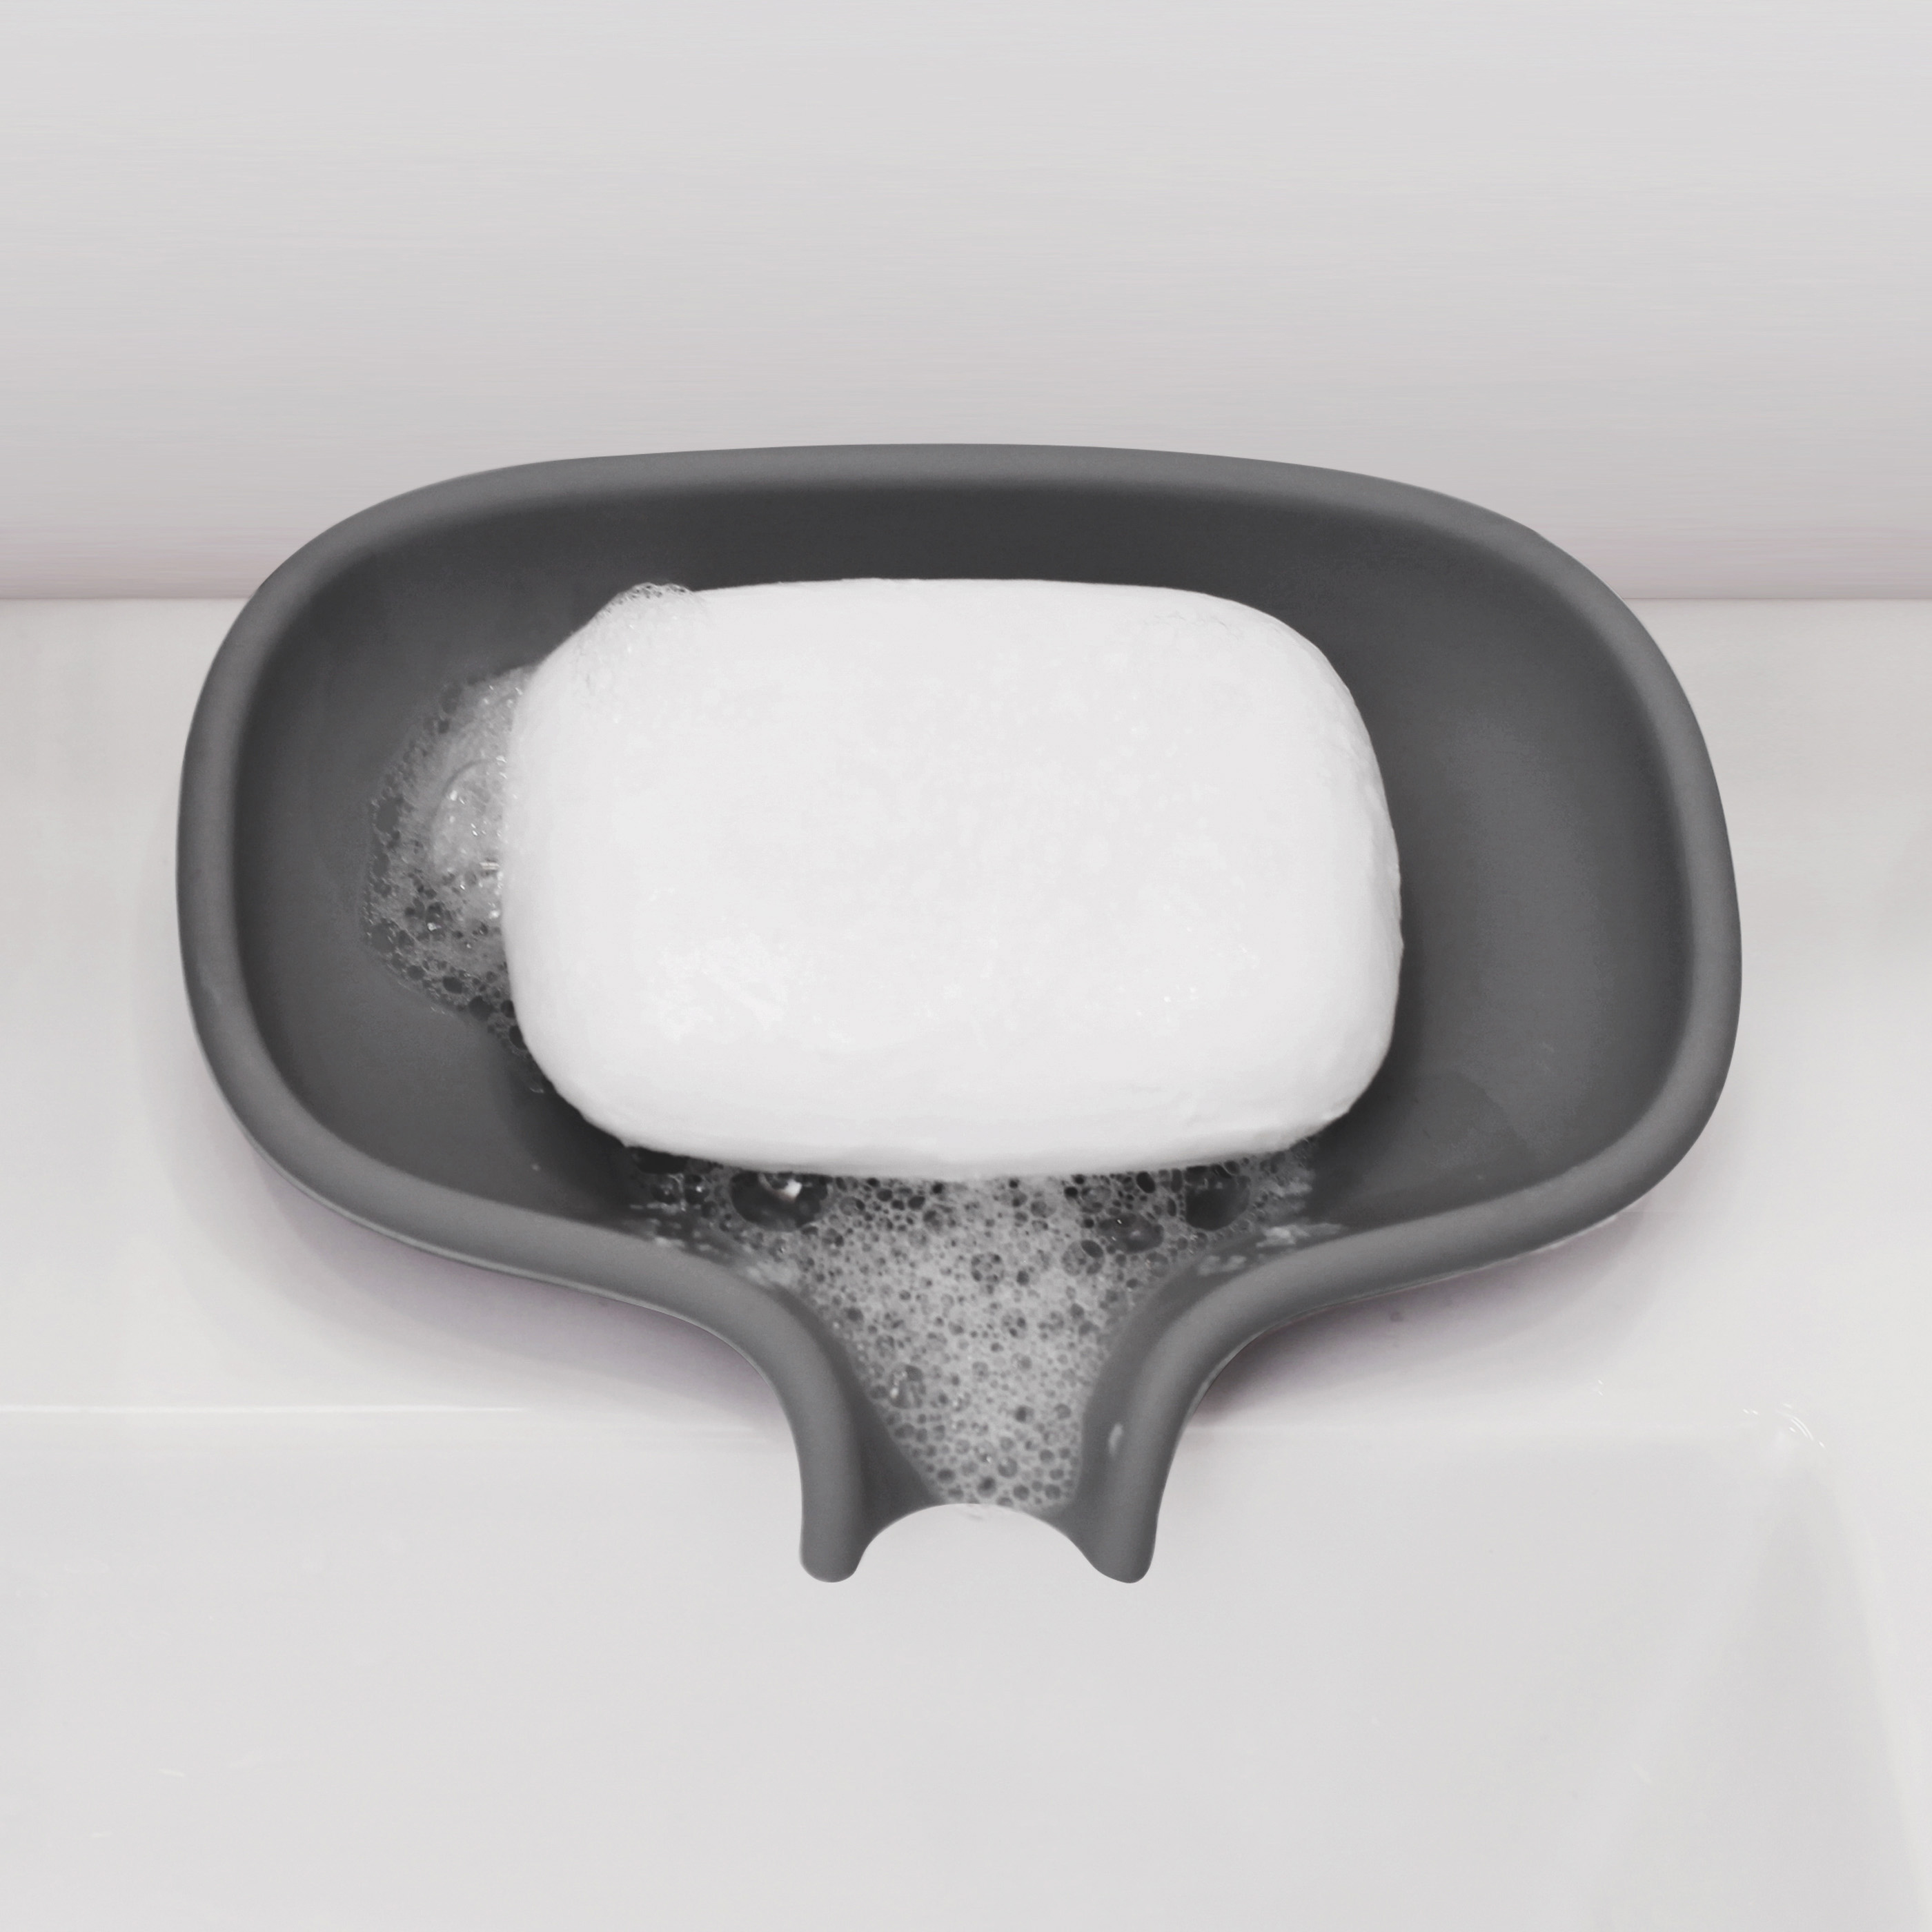 https://www.nordicnest.com/assets/blobs/bosign-soap-dish-with-drainage-spout-silicone-grafite-grey/509631-01_5_EnvironmentImage-48164aff72.jpg